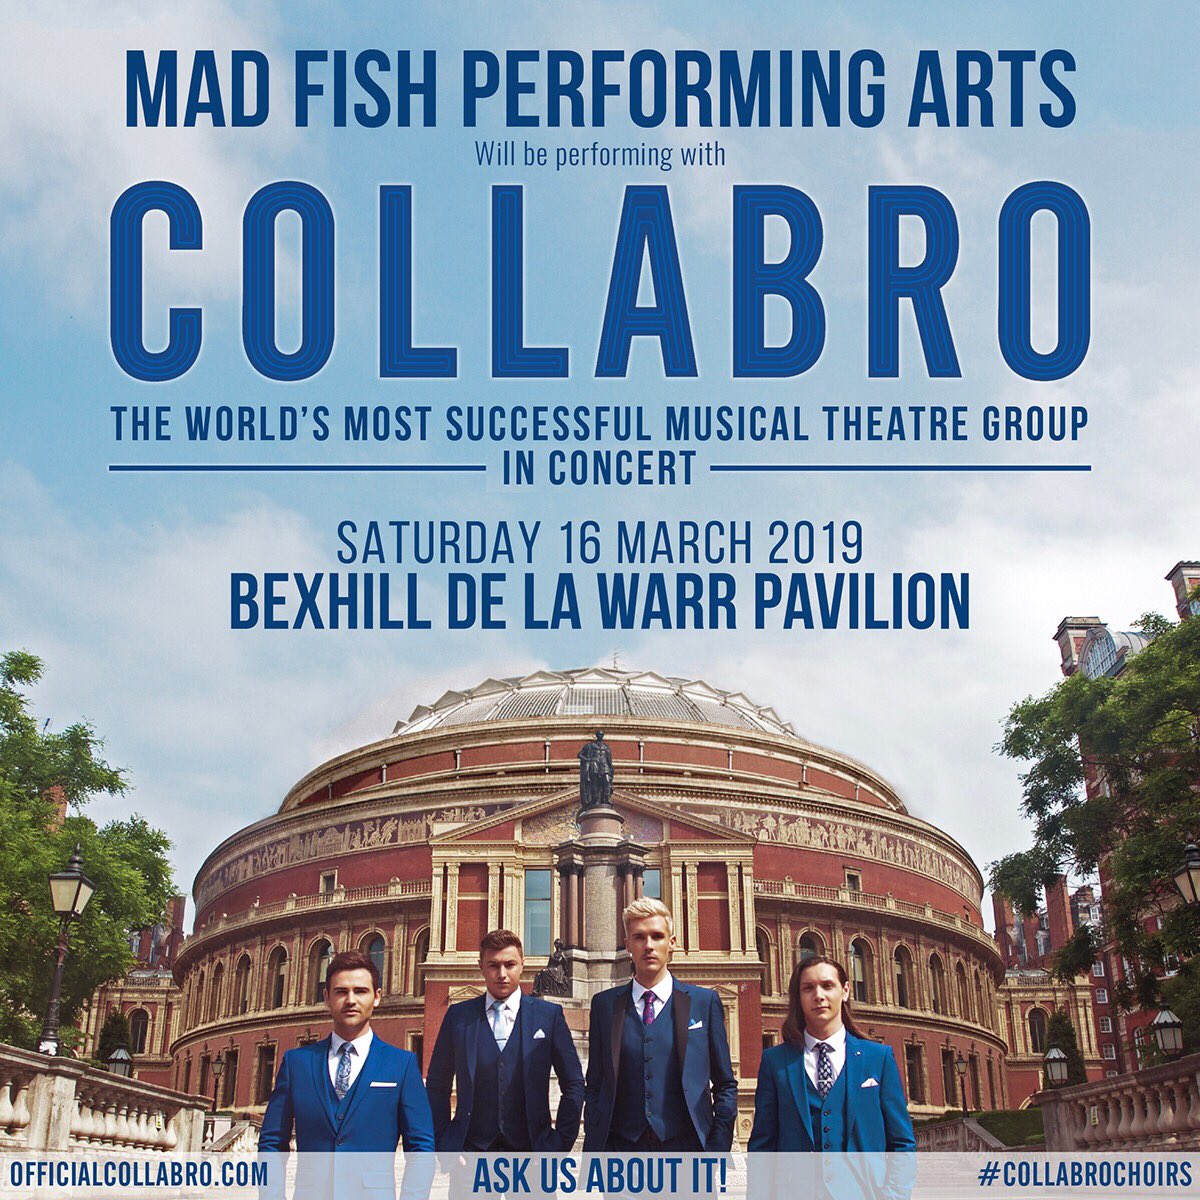 We are so so thrilled and proud to have selected to sing with COLLABRO at the De La Warr on Sat 16th March 2019
Our choir are super excited about this wonderful news 
Well done Fishes 🐠⭐️🐠⭐️🐠
#collabrochoirs